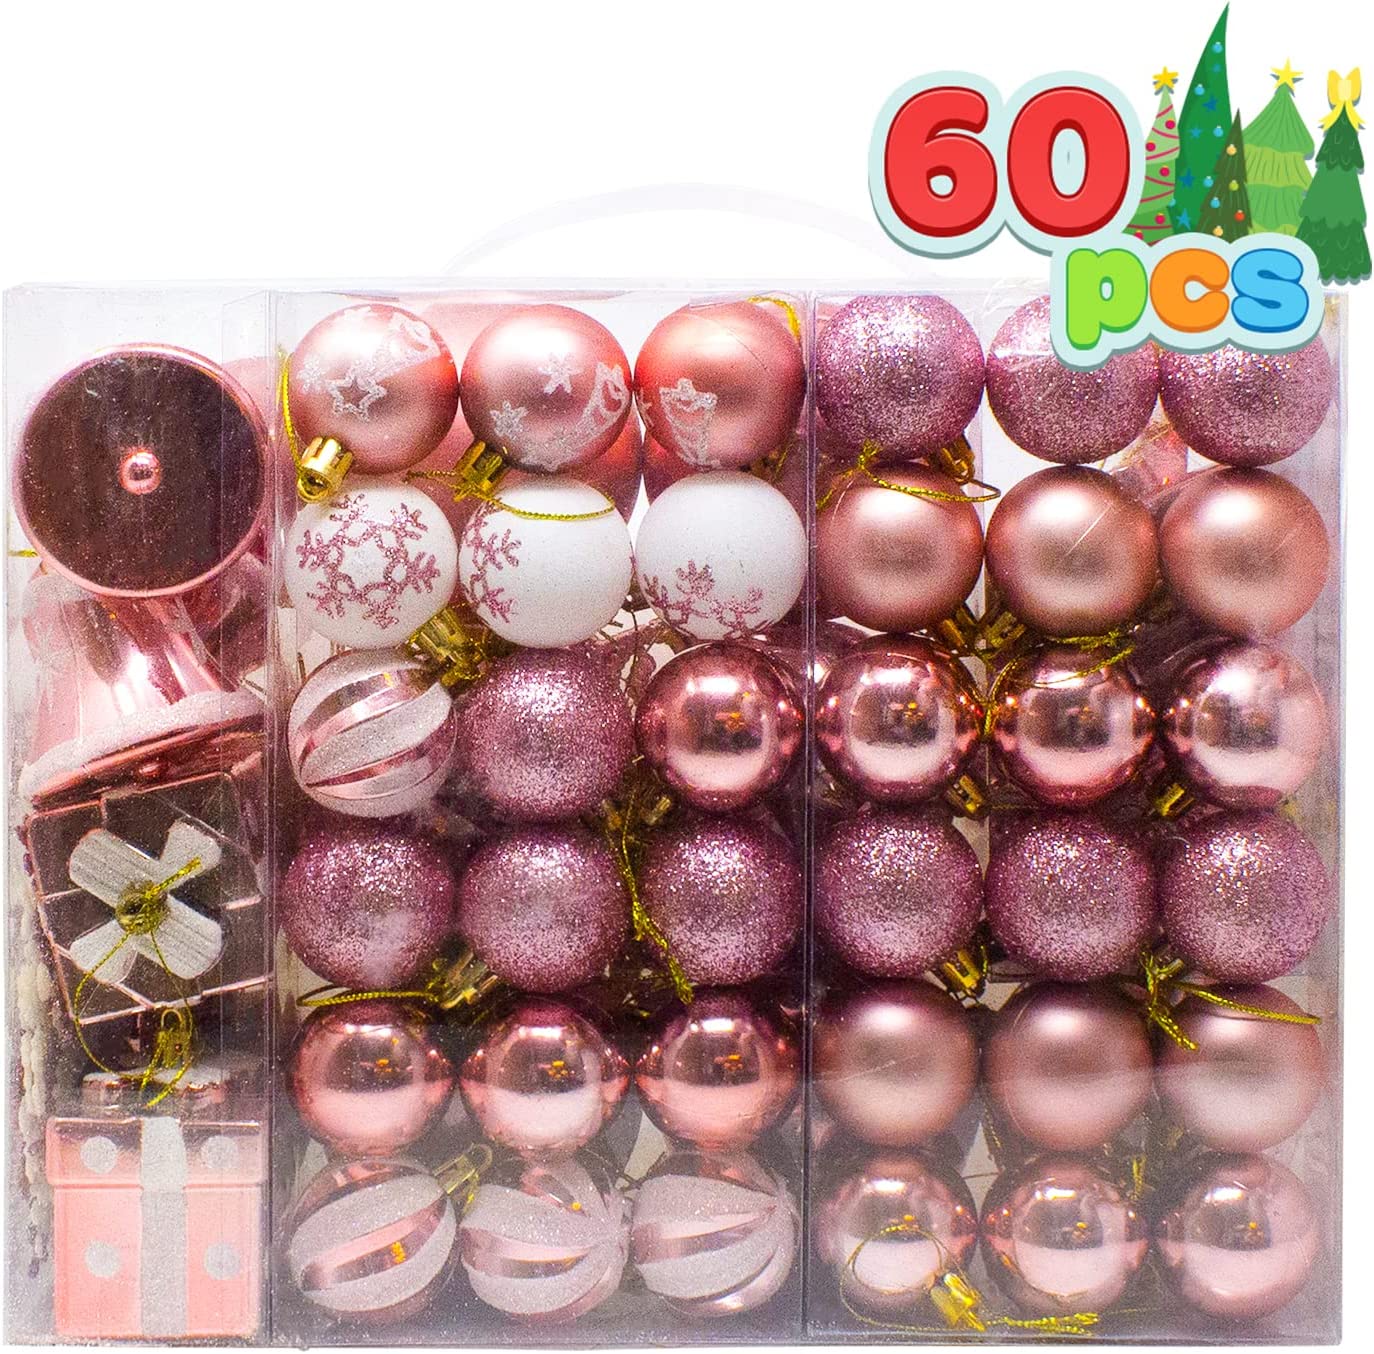 66 Pcs Christmas Assorted Ornaments with a Star Tree Topper Red & White